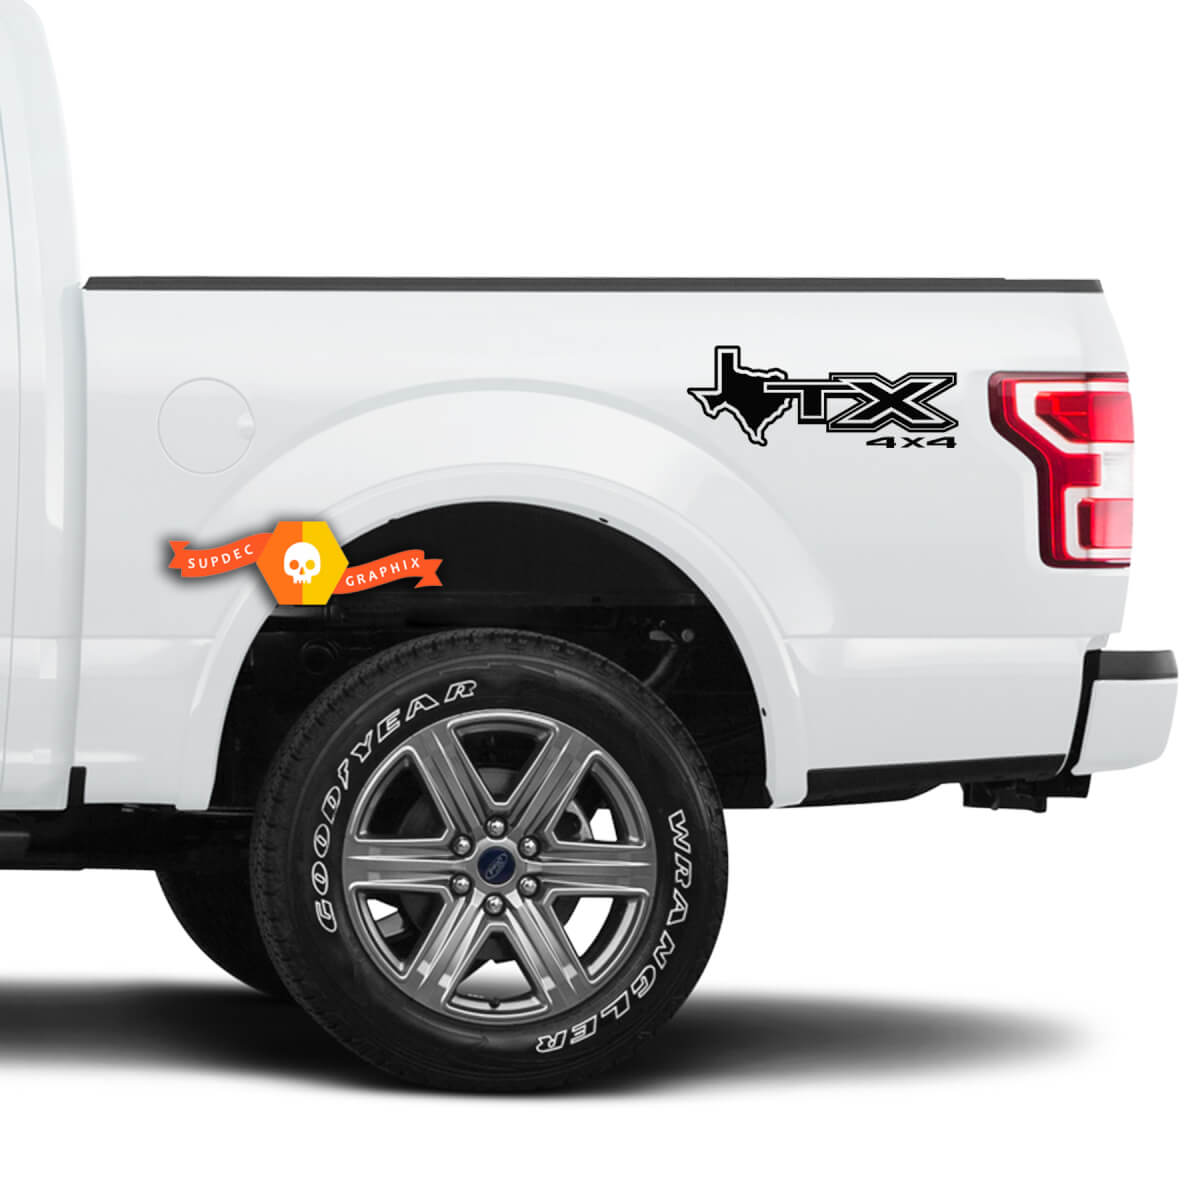 Paire STX Texas 4x4 Mountain Decals pour Ford F150 F250 F350 Super Duty Truck Sticker Decal Vinyl